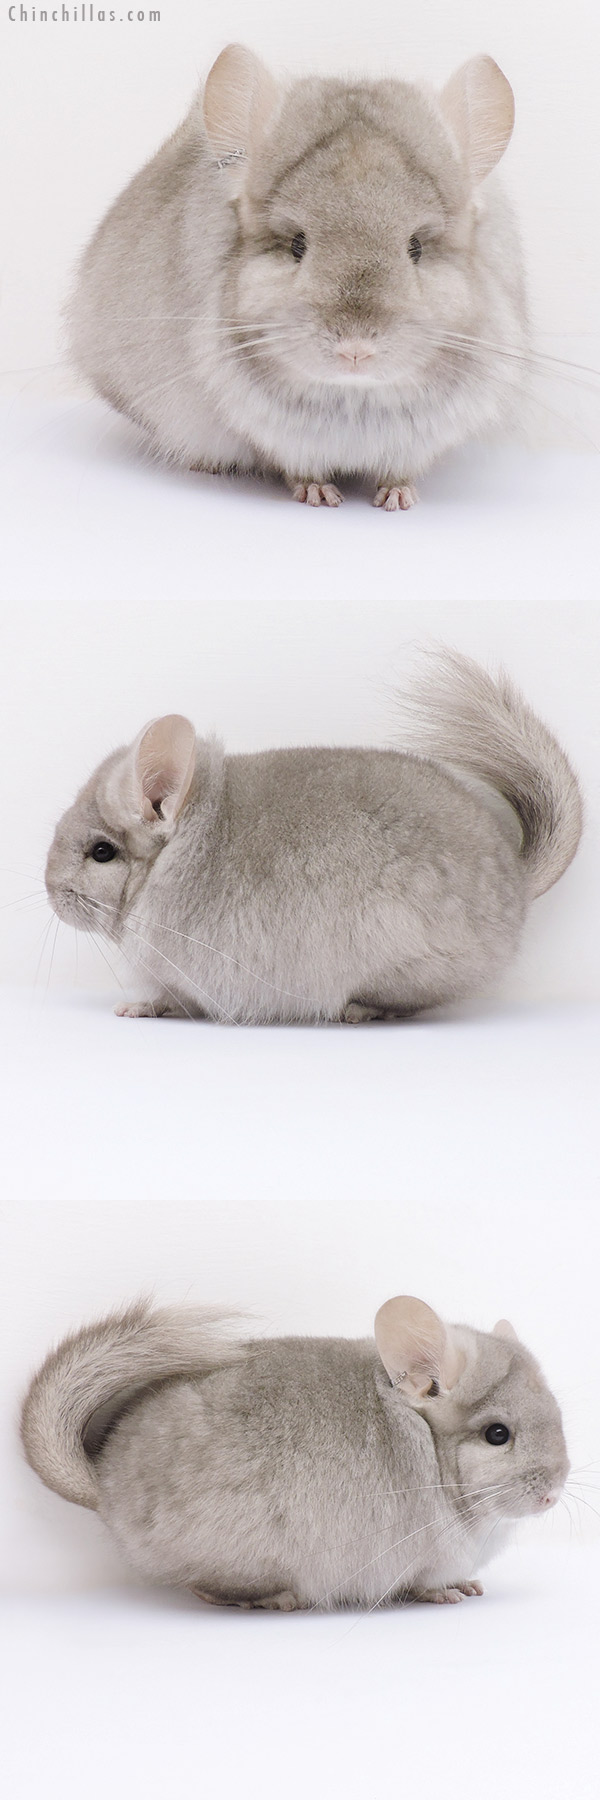 Chinchilla or related item offered for sale or export on Chinchillas.com - 16316 Beige ( Ebony Carrier )  Royal Persian Angora Female Chinchilla